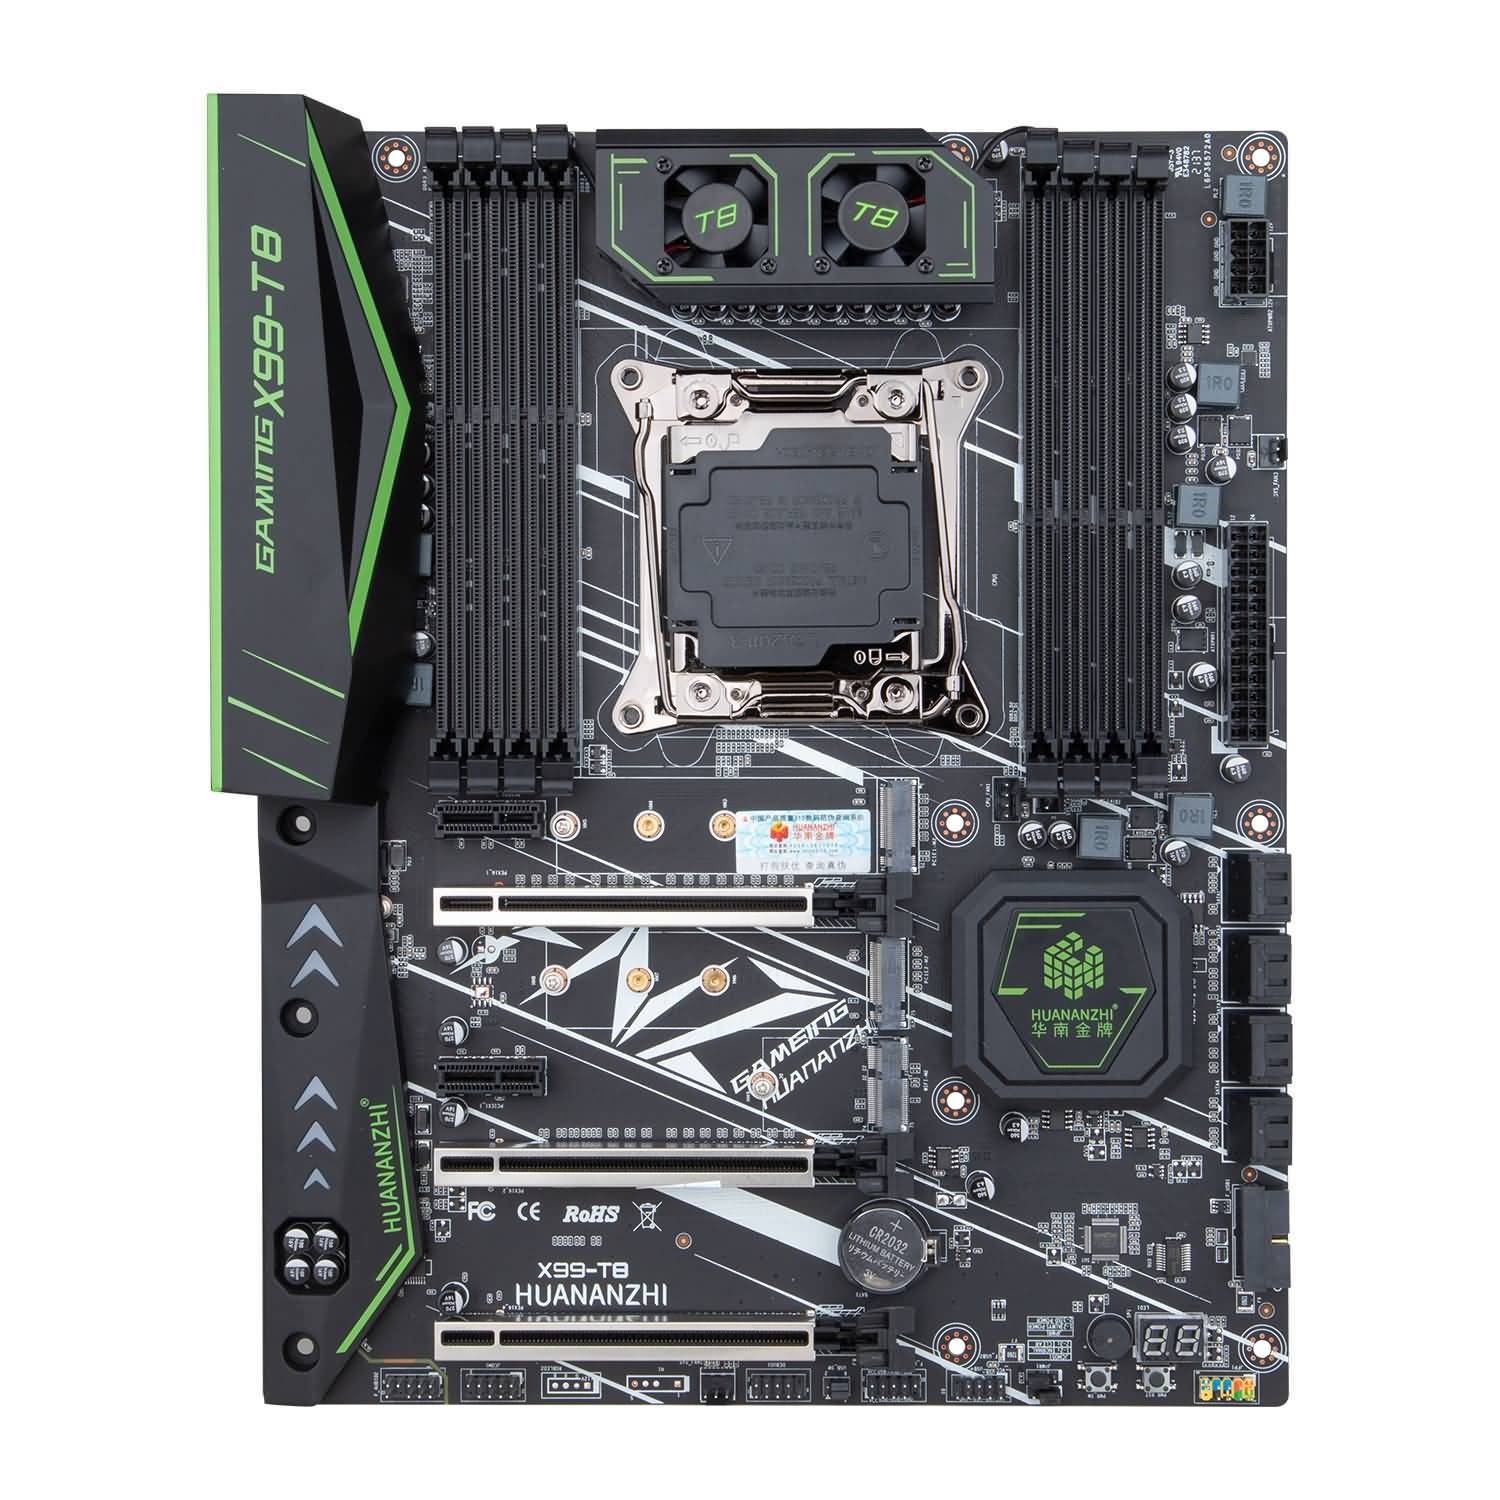 Download Huananzhi X99-T8 Motherboard Free